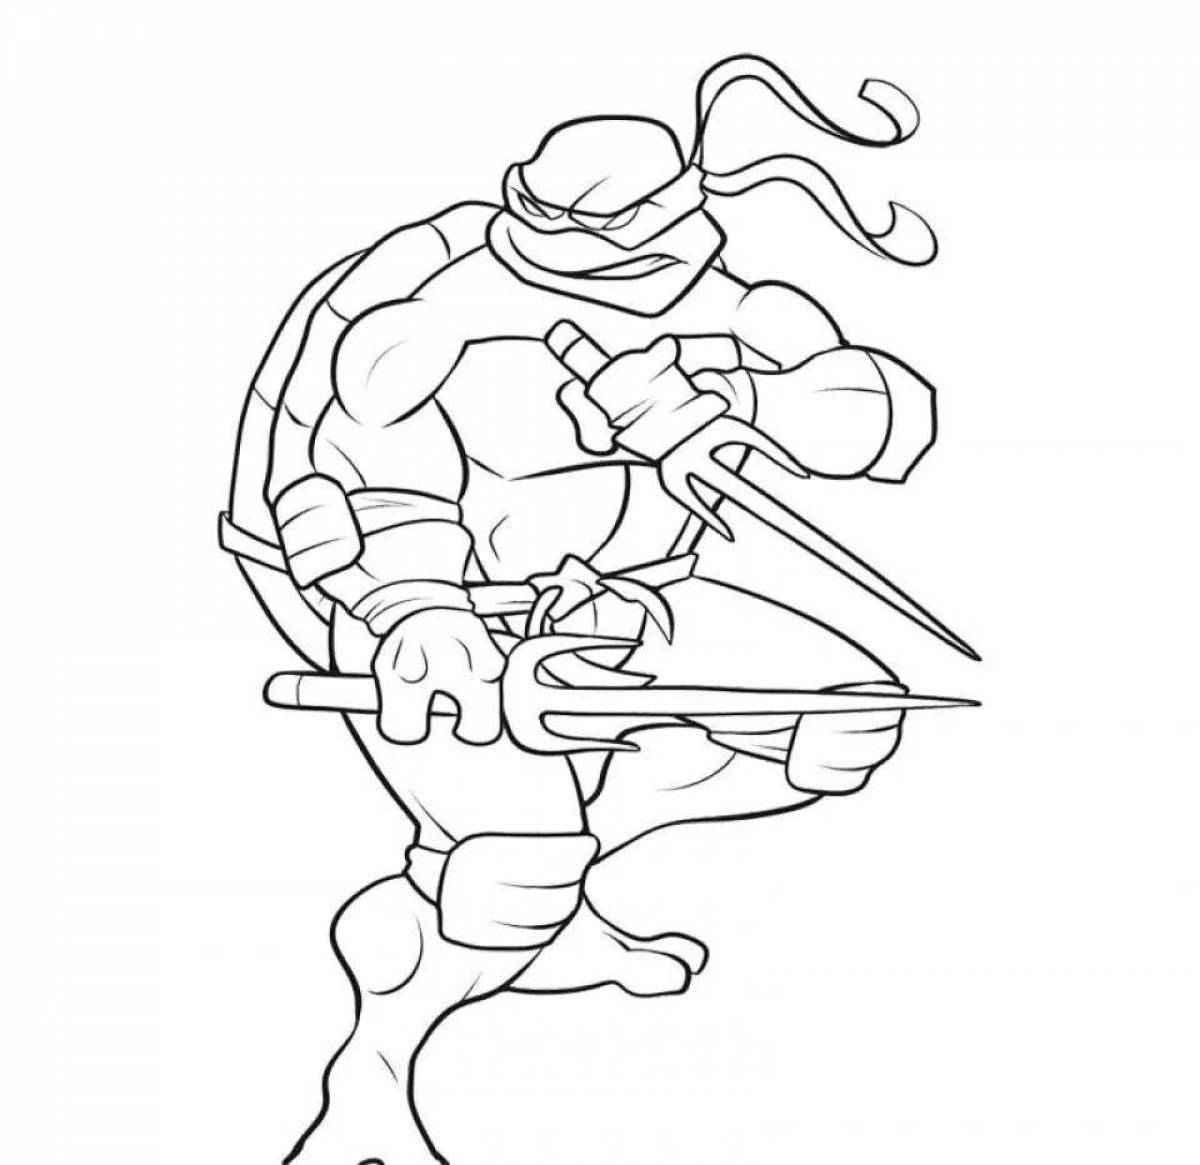 Great superheroes coloring pages for 5-6 year olds